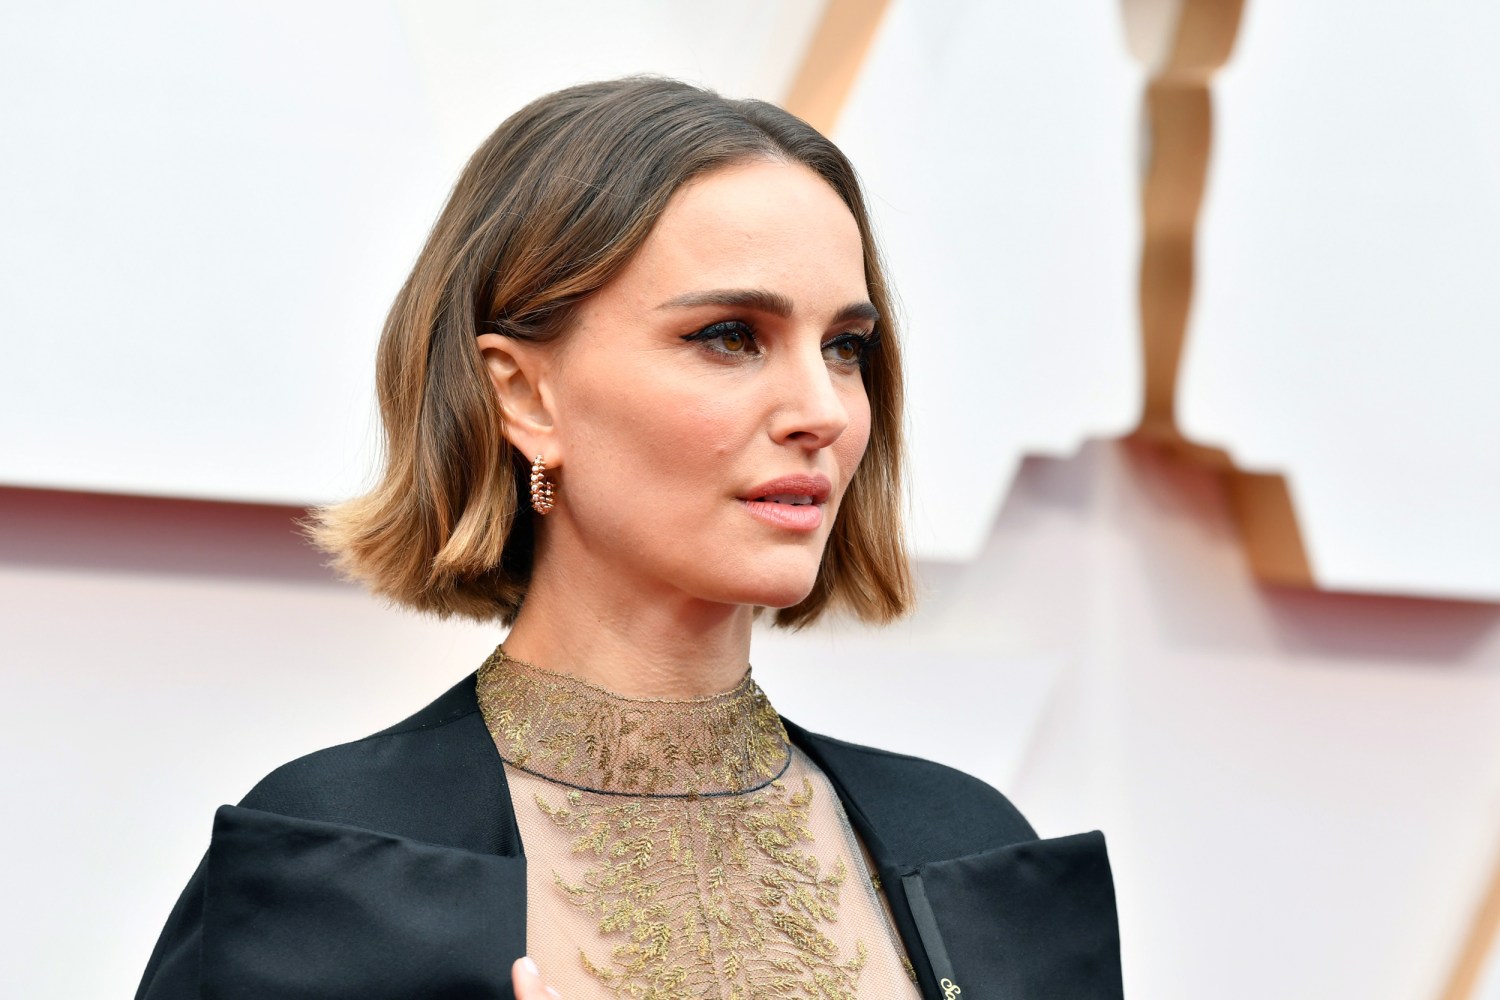 Natalie Portman says playing sexualized characters as a teenage actor made her afraid photo pic